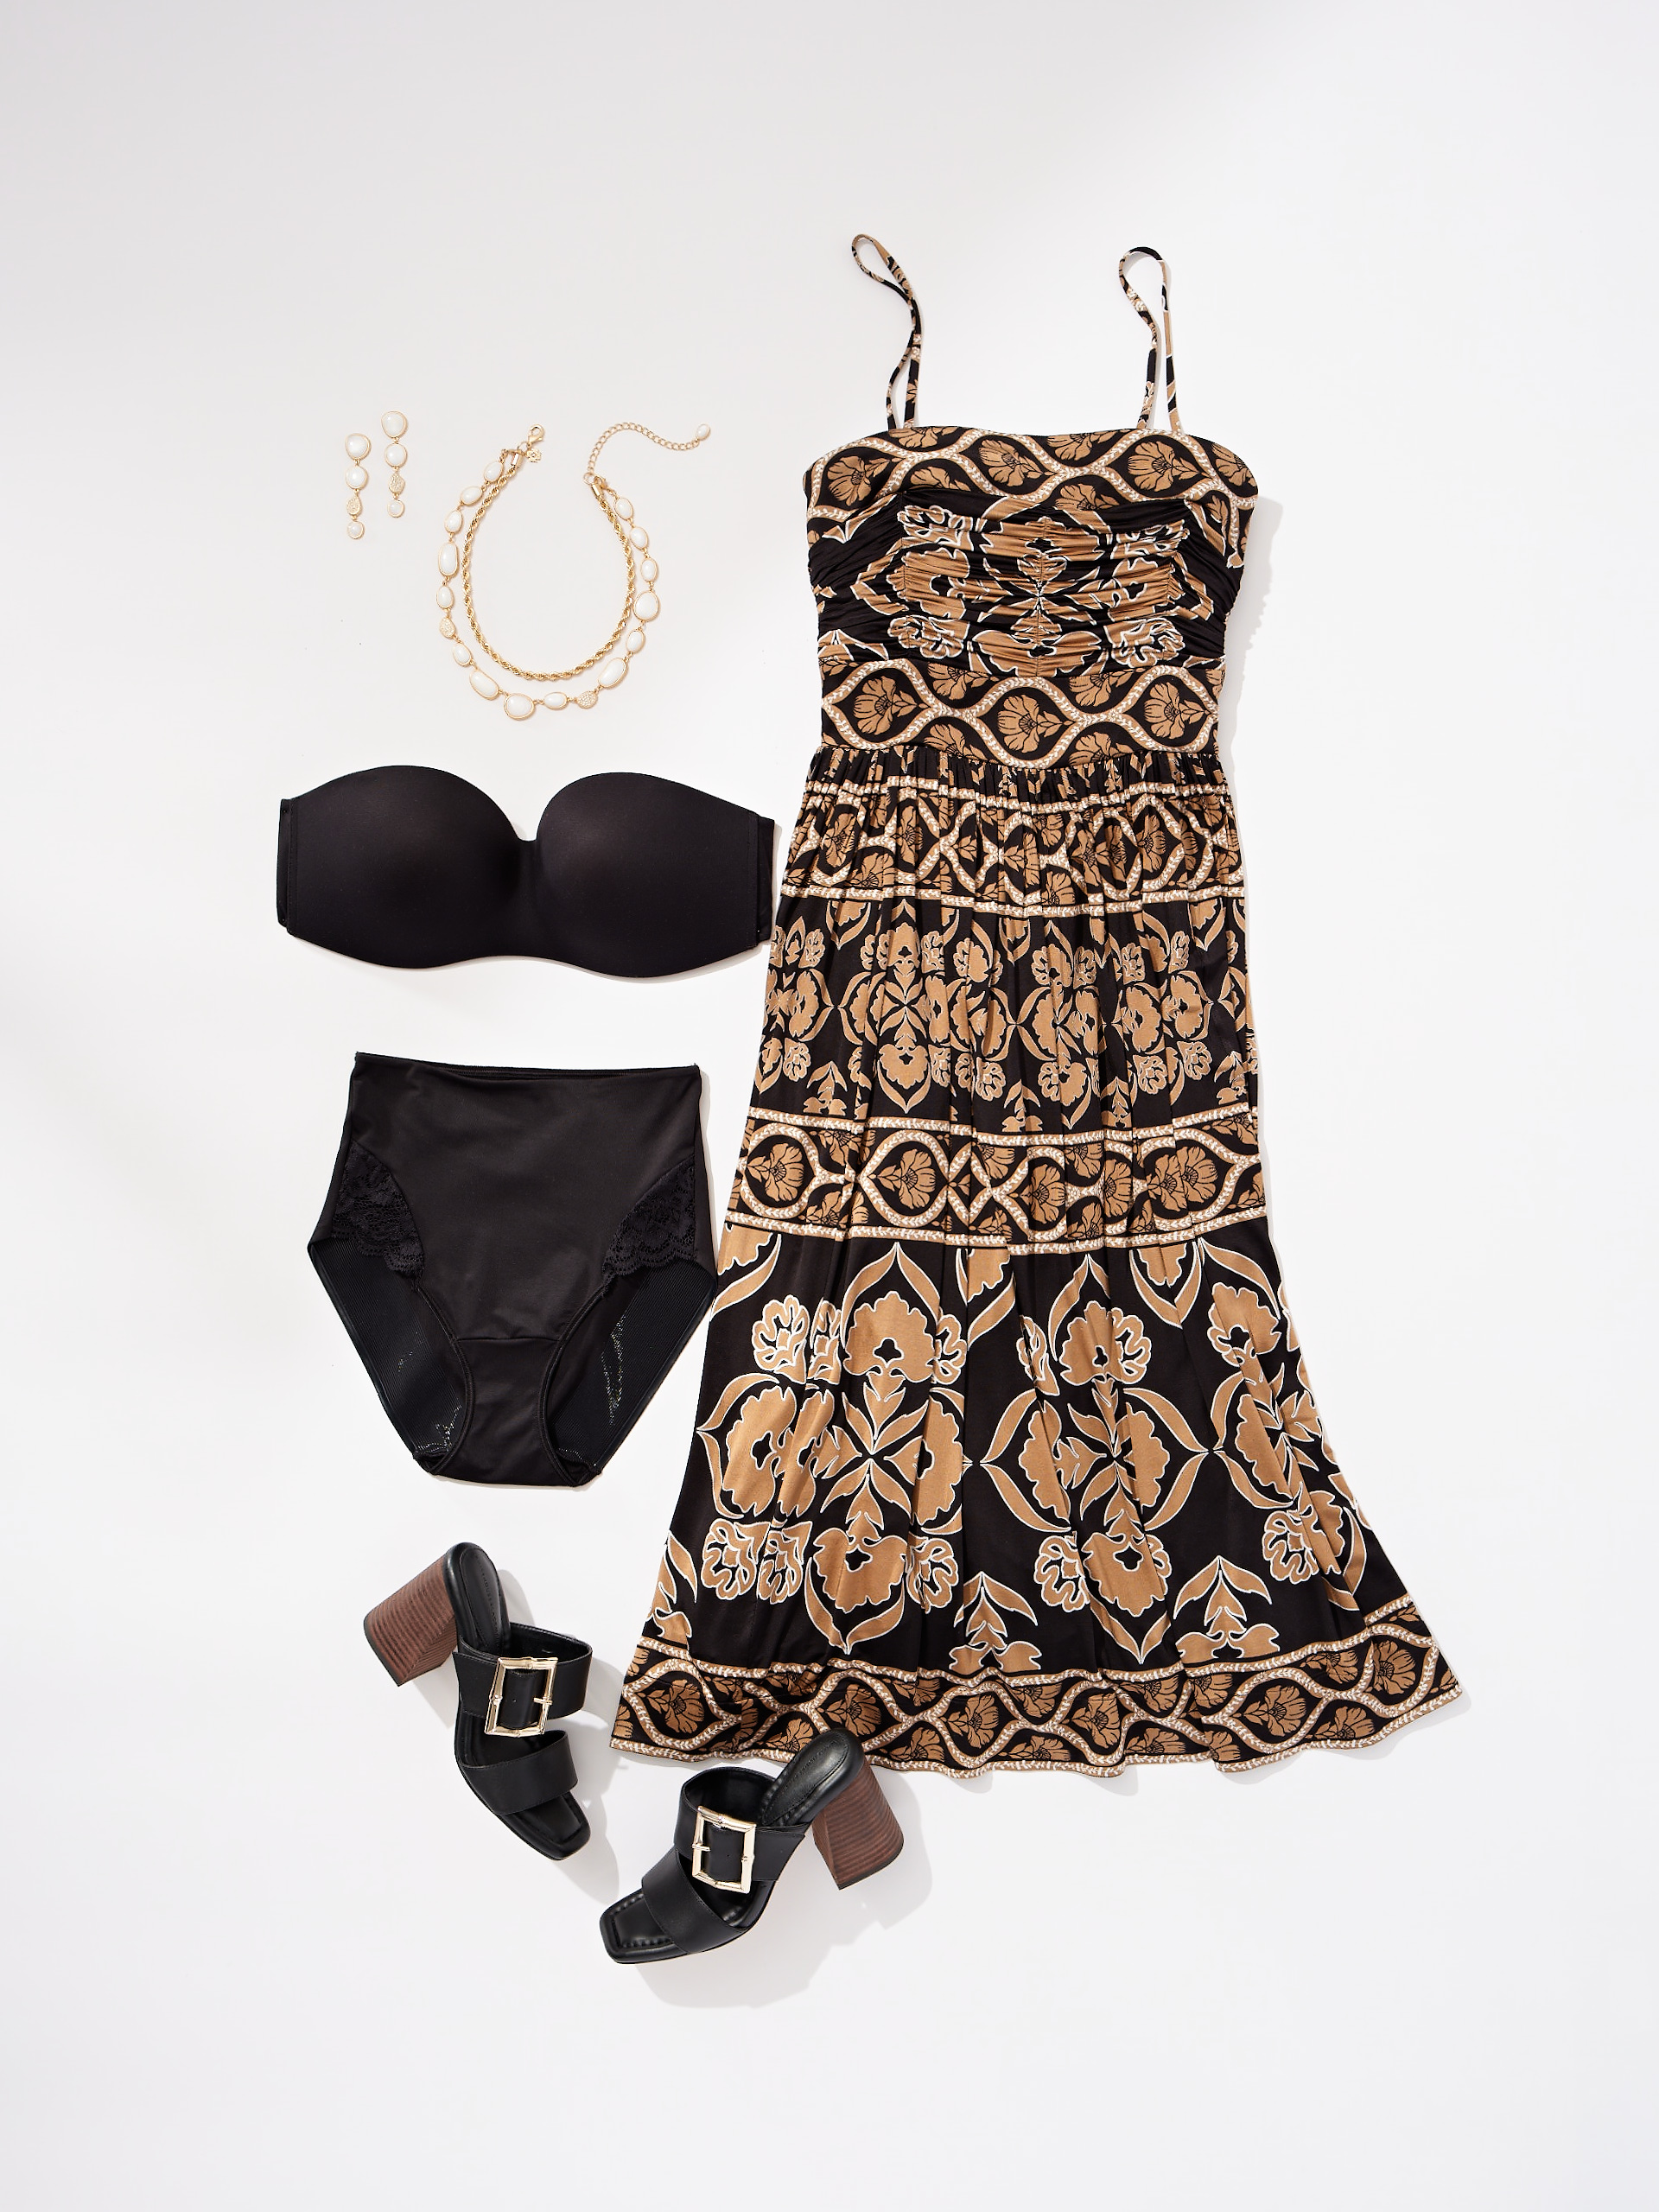 Soma<sup class=st-superscript>®</sup> laydown of a black bra and panties next to a WHBM dress, black shoes, and gold necklace and earrings. 